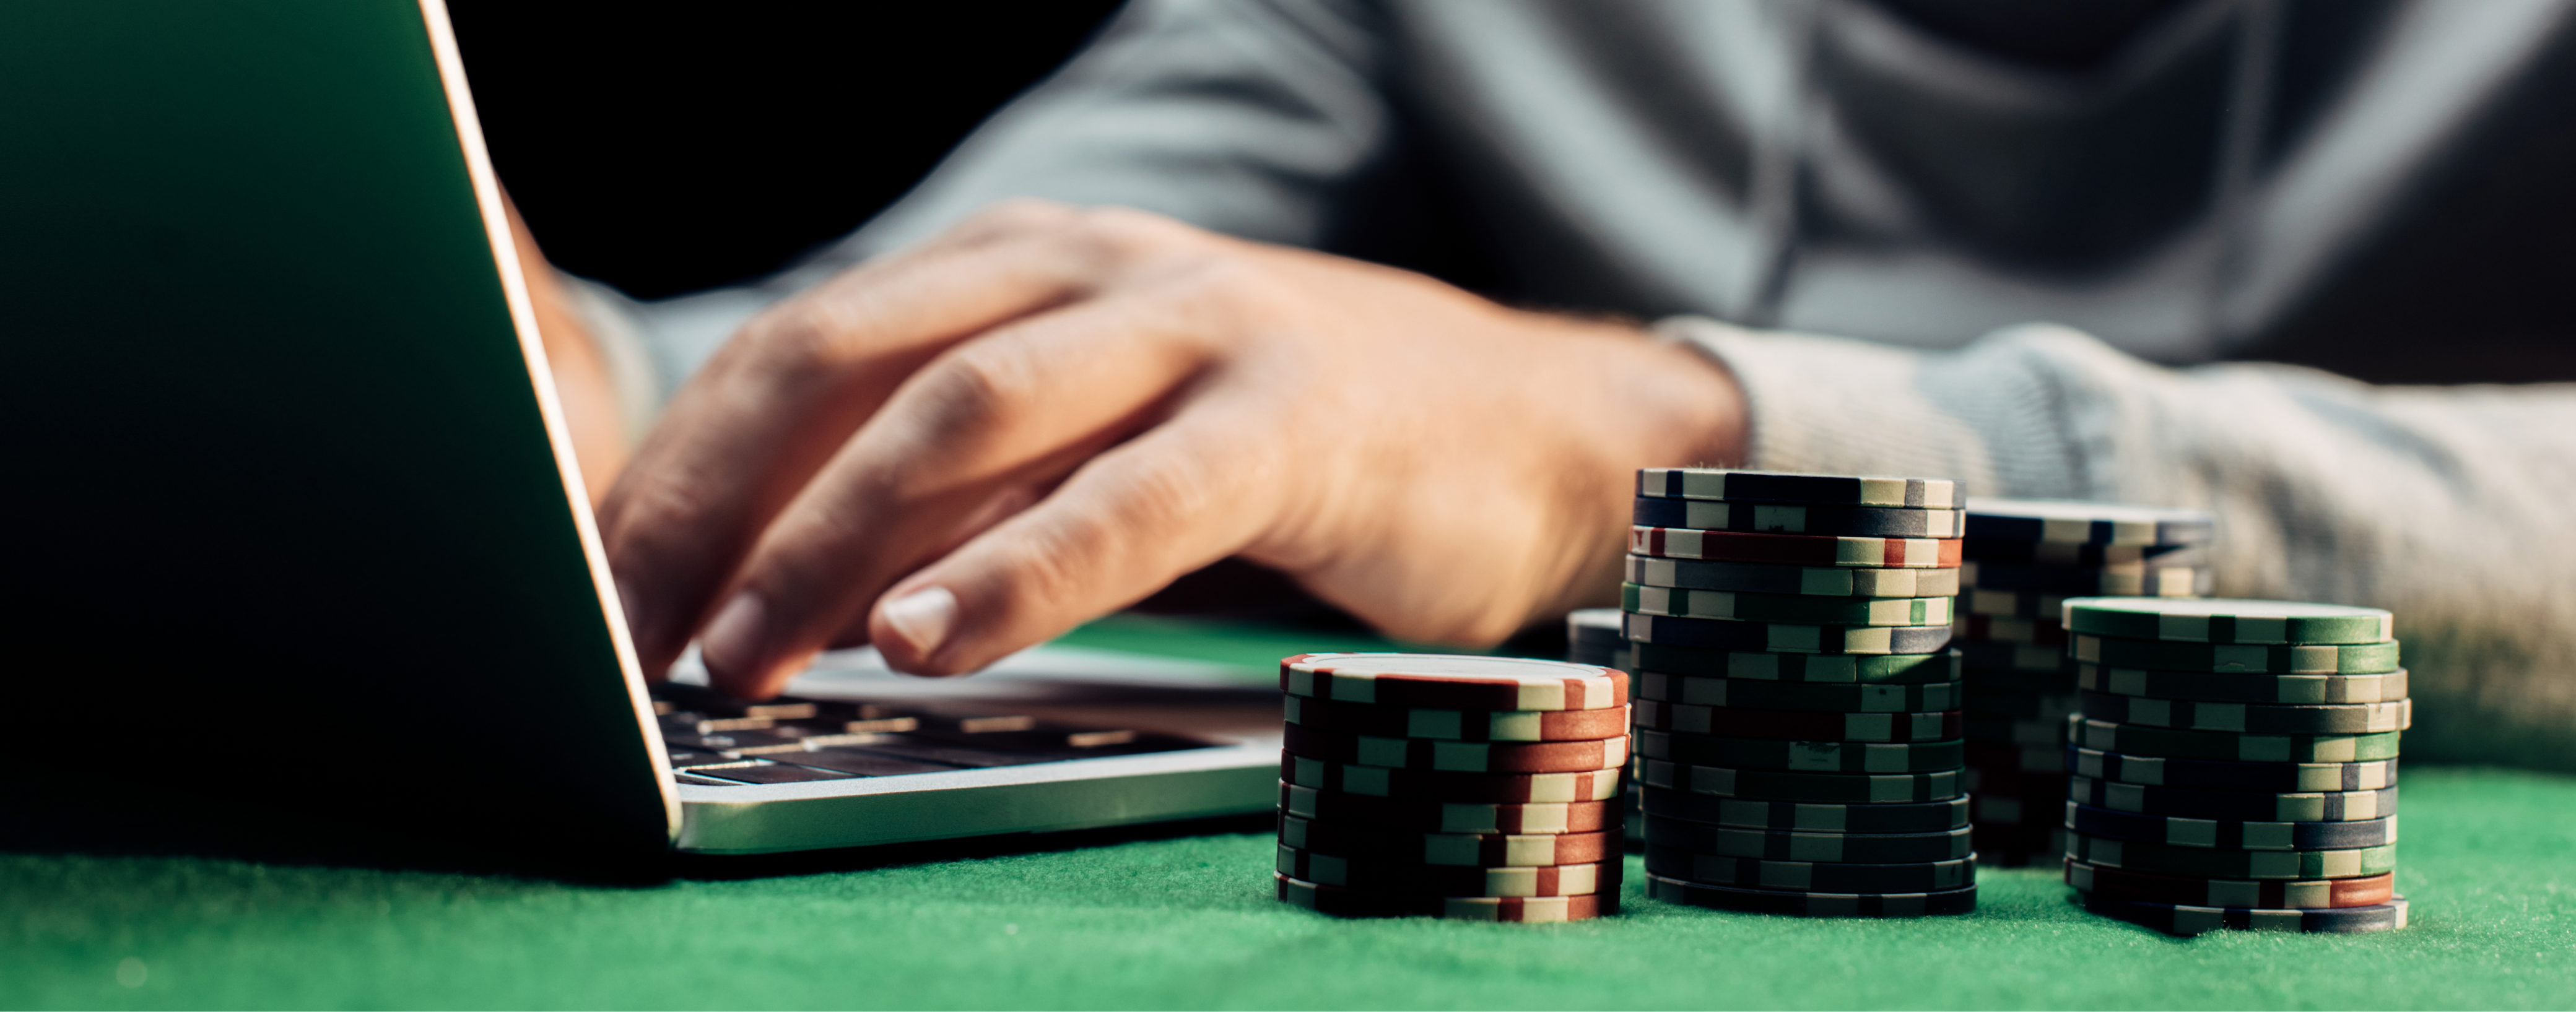 hero 1 9 Simple Techniques For 5 Tips For Staying Safe While Playing At Online Casinos